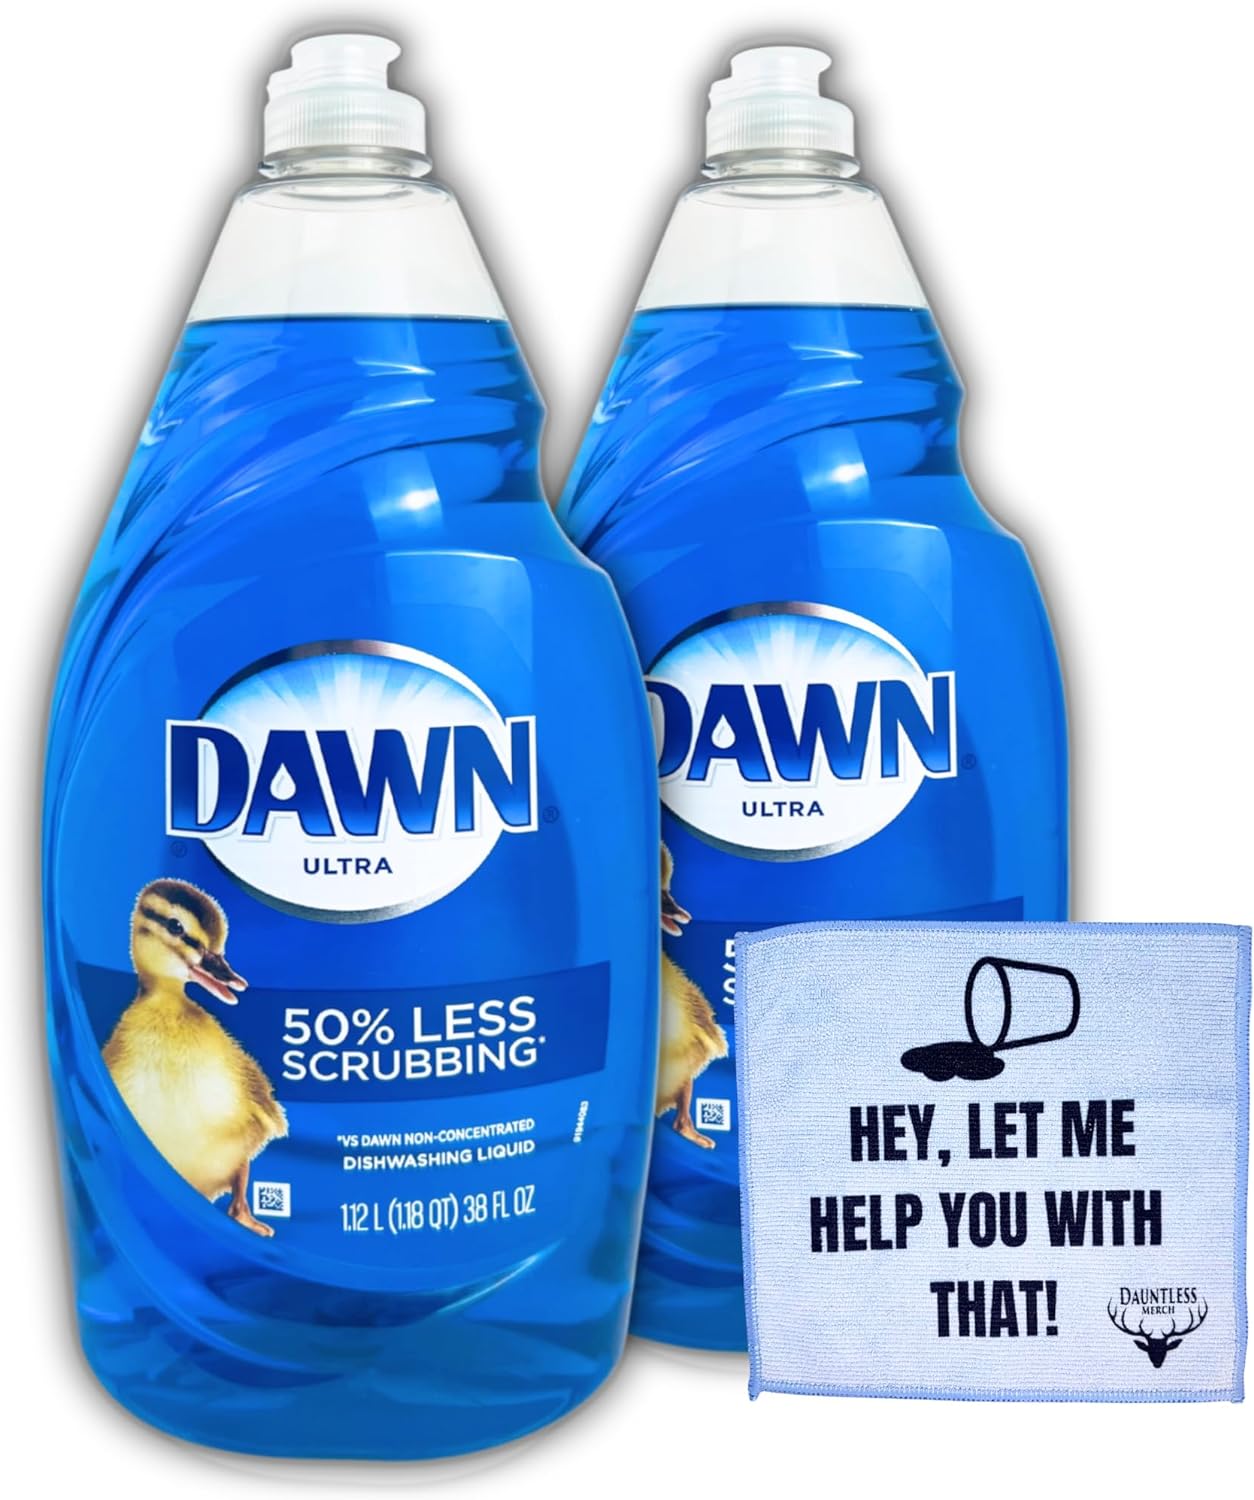 Dawn, Ultra Dishwashing Liquid, 76 Oz Total Dish Detergent, Pack of 2-38 Oz Dish Soap Liquid, Bundle with 8x8 Inch, Let Me Help You With That - Dish Cloth